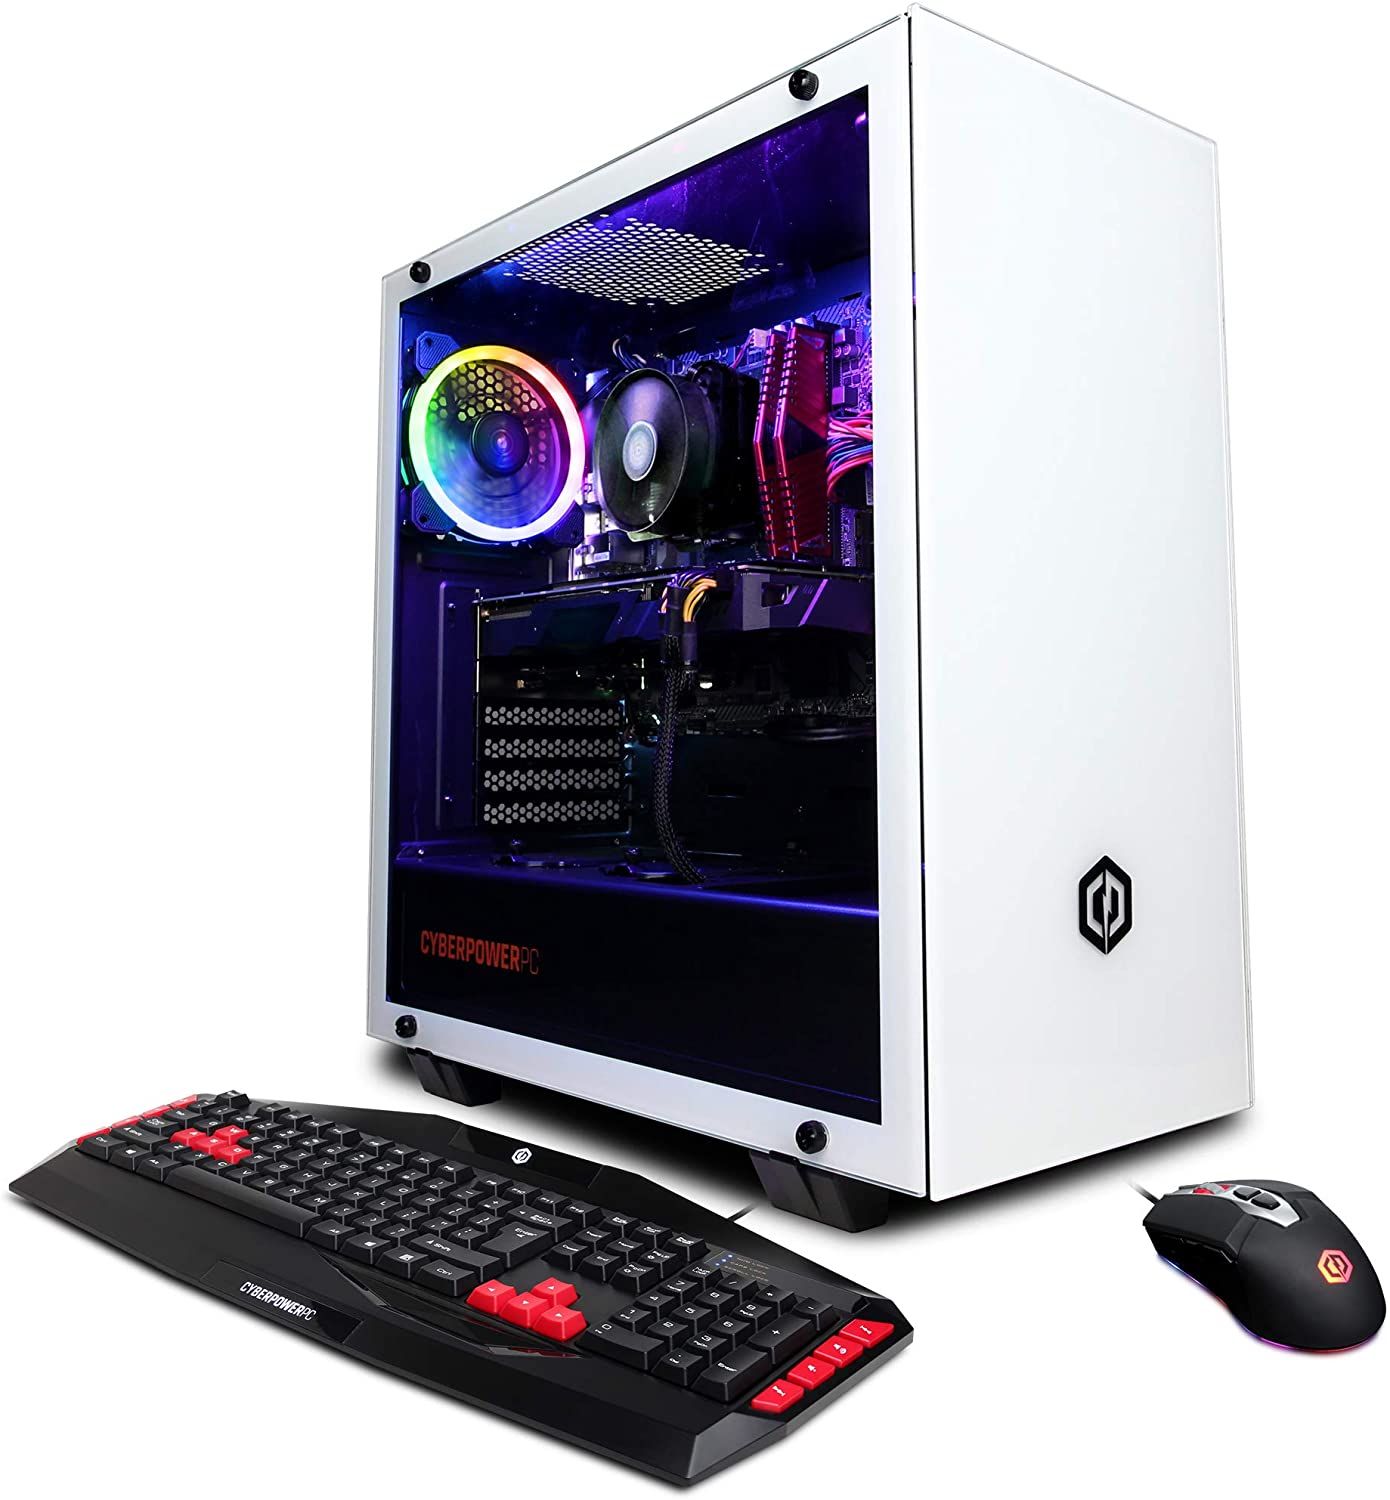 cyberpower pc vr gaming pc gxivr8060a8